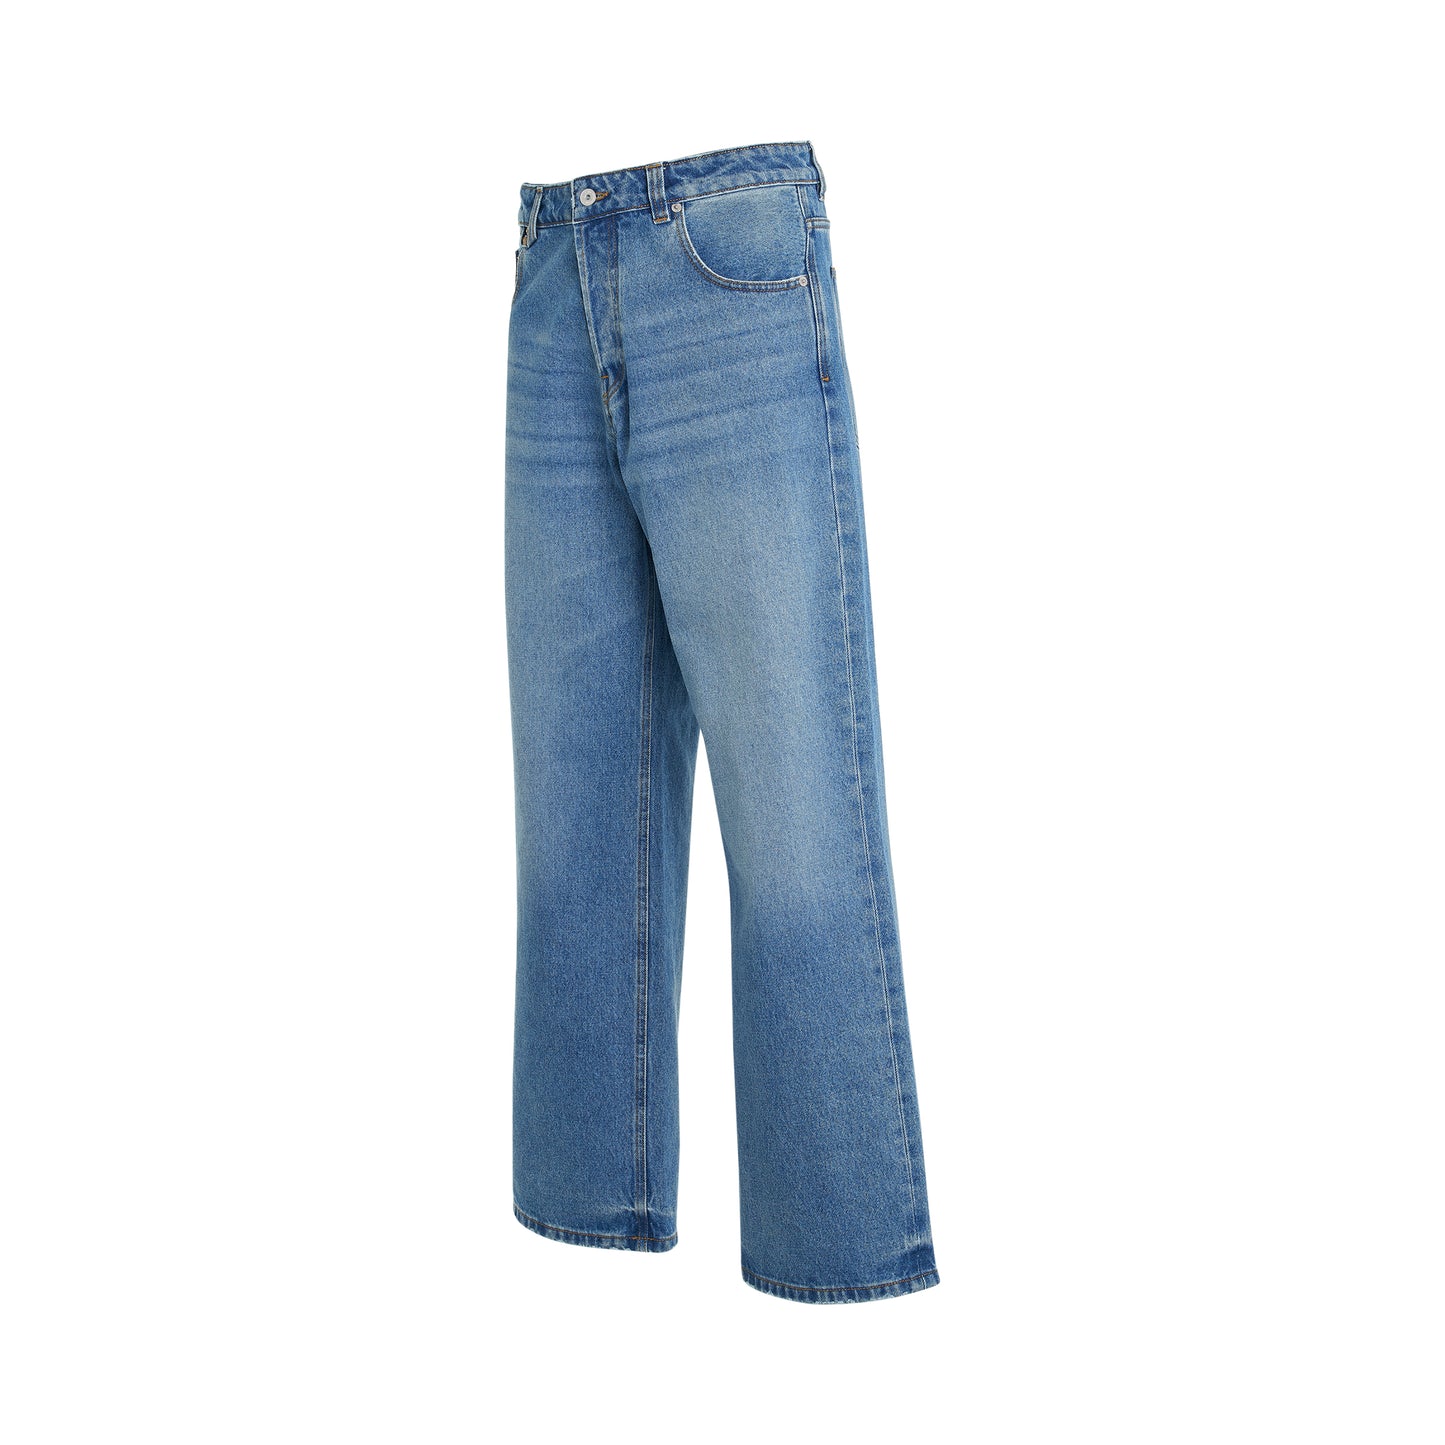 Le Denimes Large Jeans in Blue/Tabac